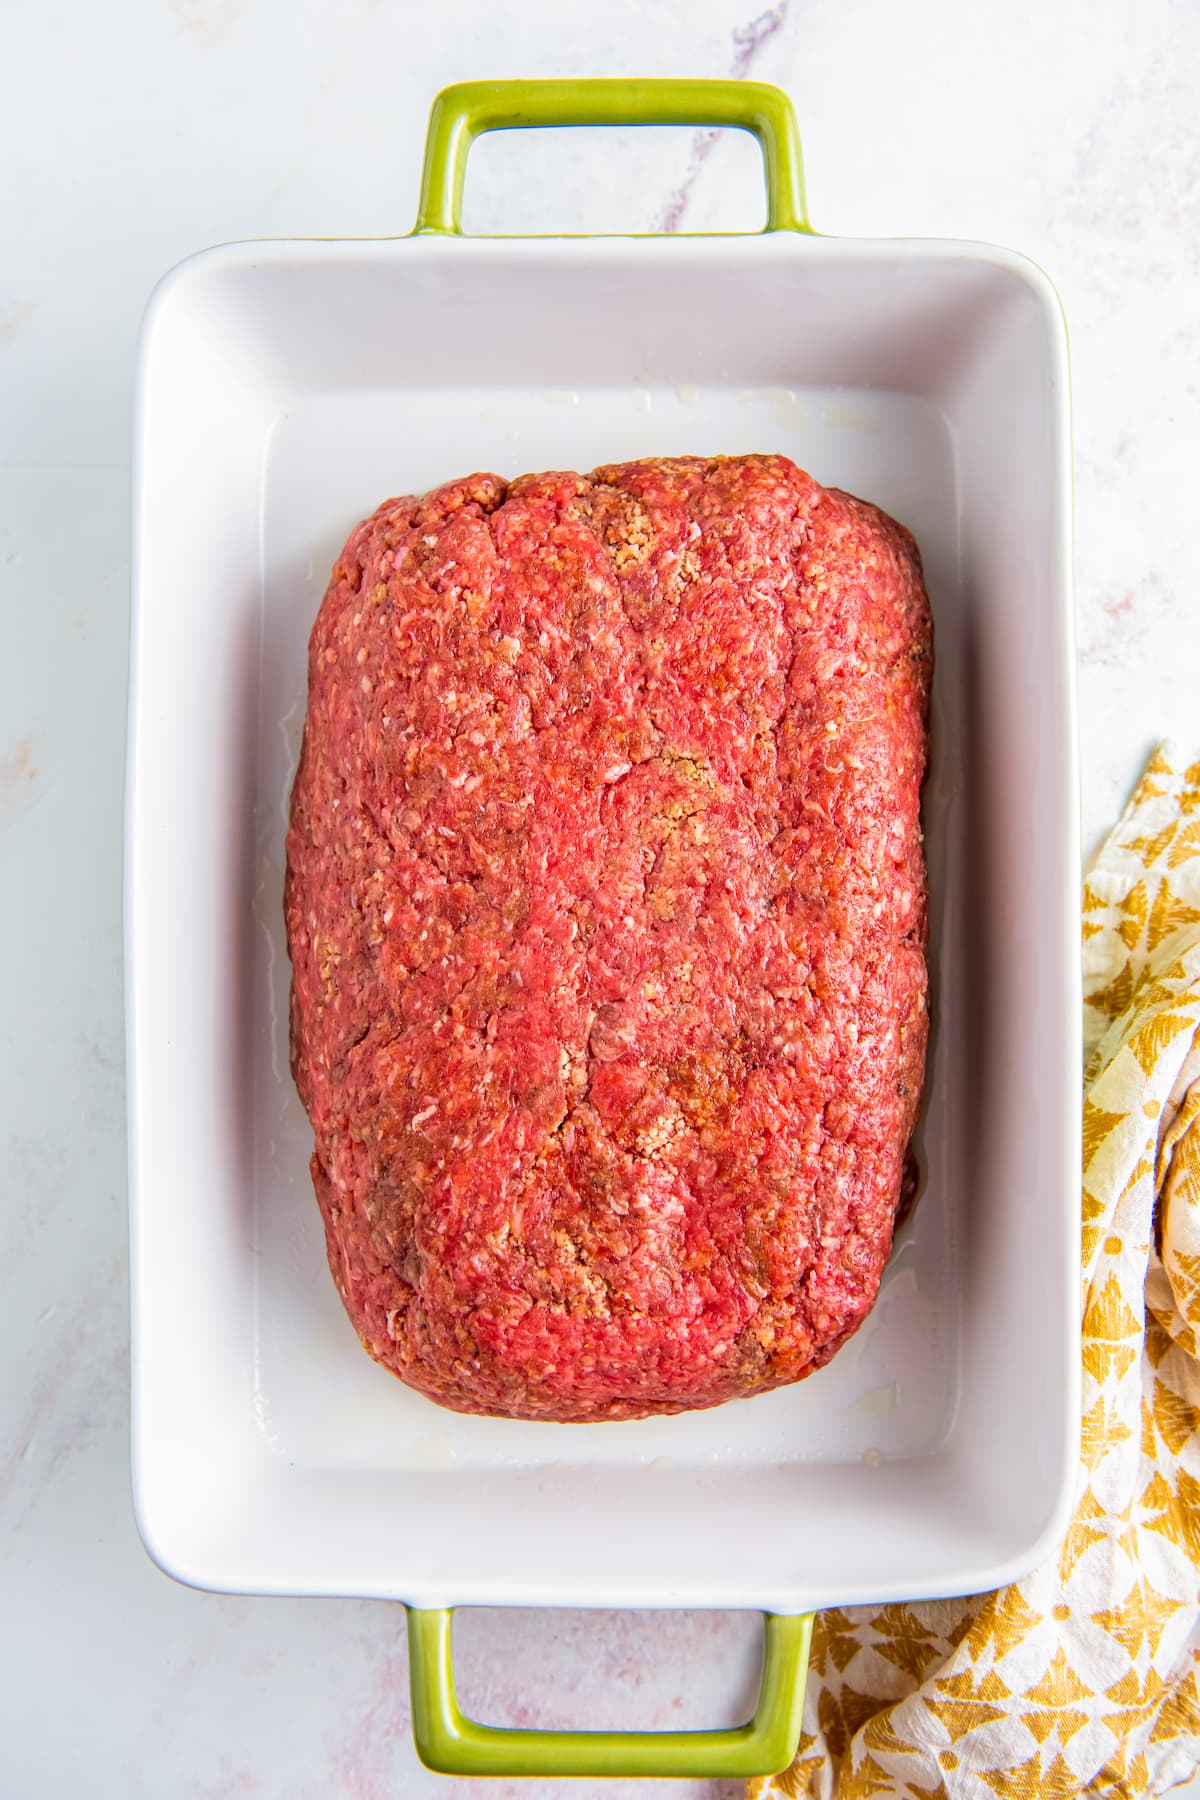 Meatloaf is placed in a loaf pan.